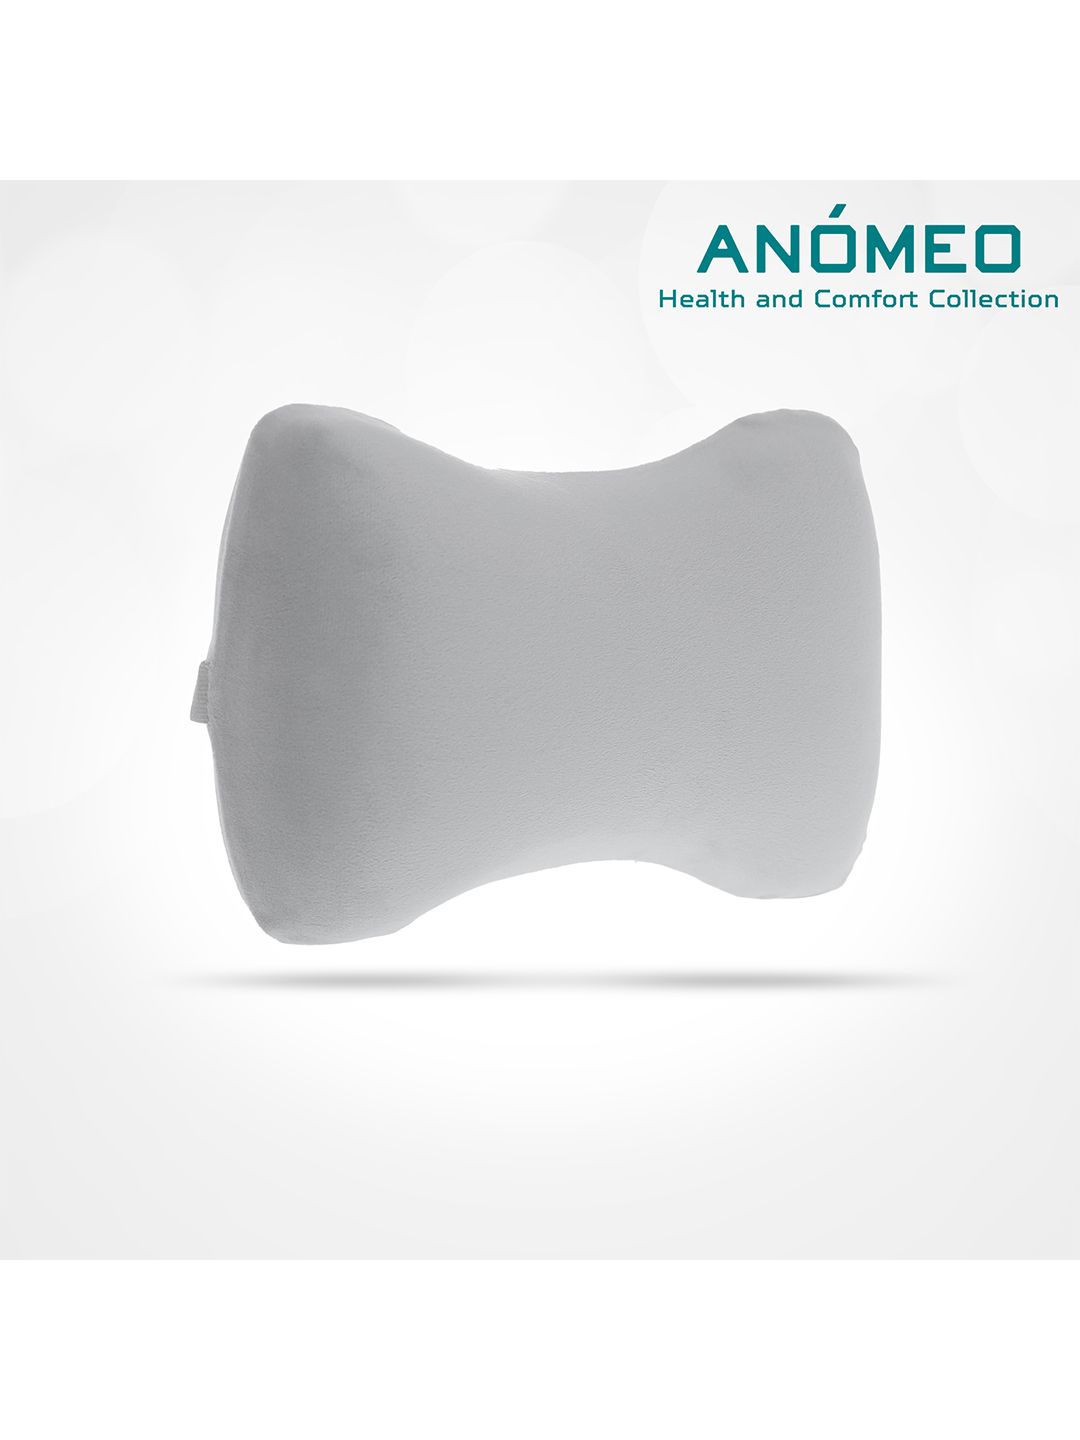 ANOMEO Grey Car Neck Support Pillow Price in India